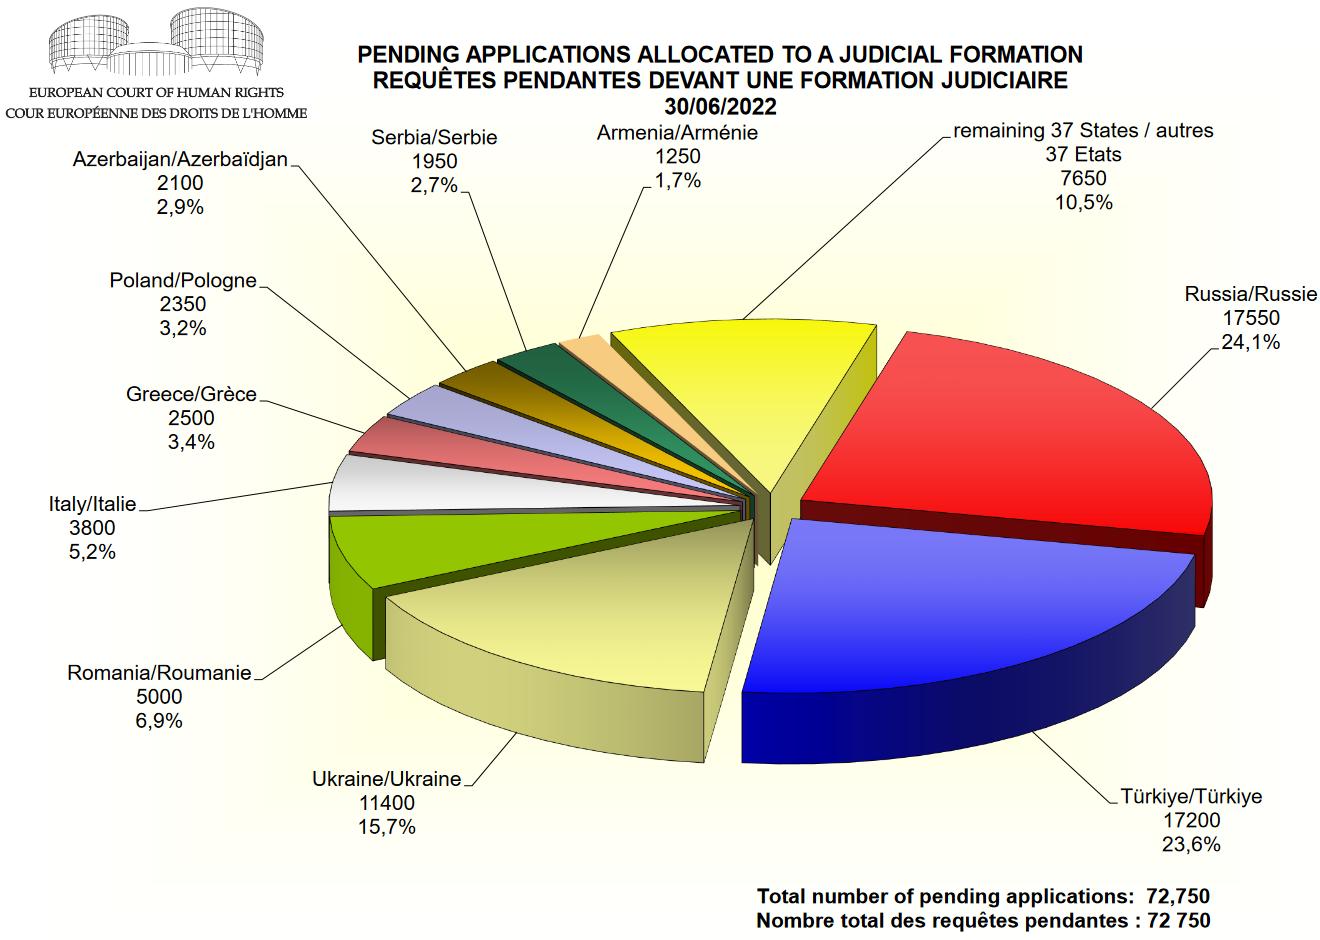 PENDING APPLICATIONS ALLOCATED TO A JUDICIAL FORMATION